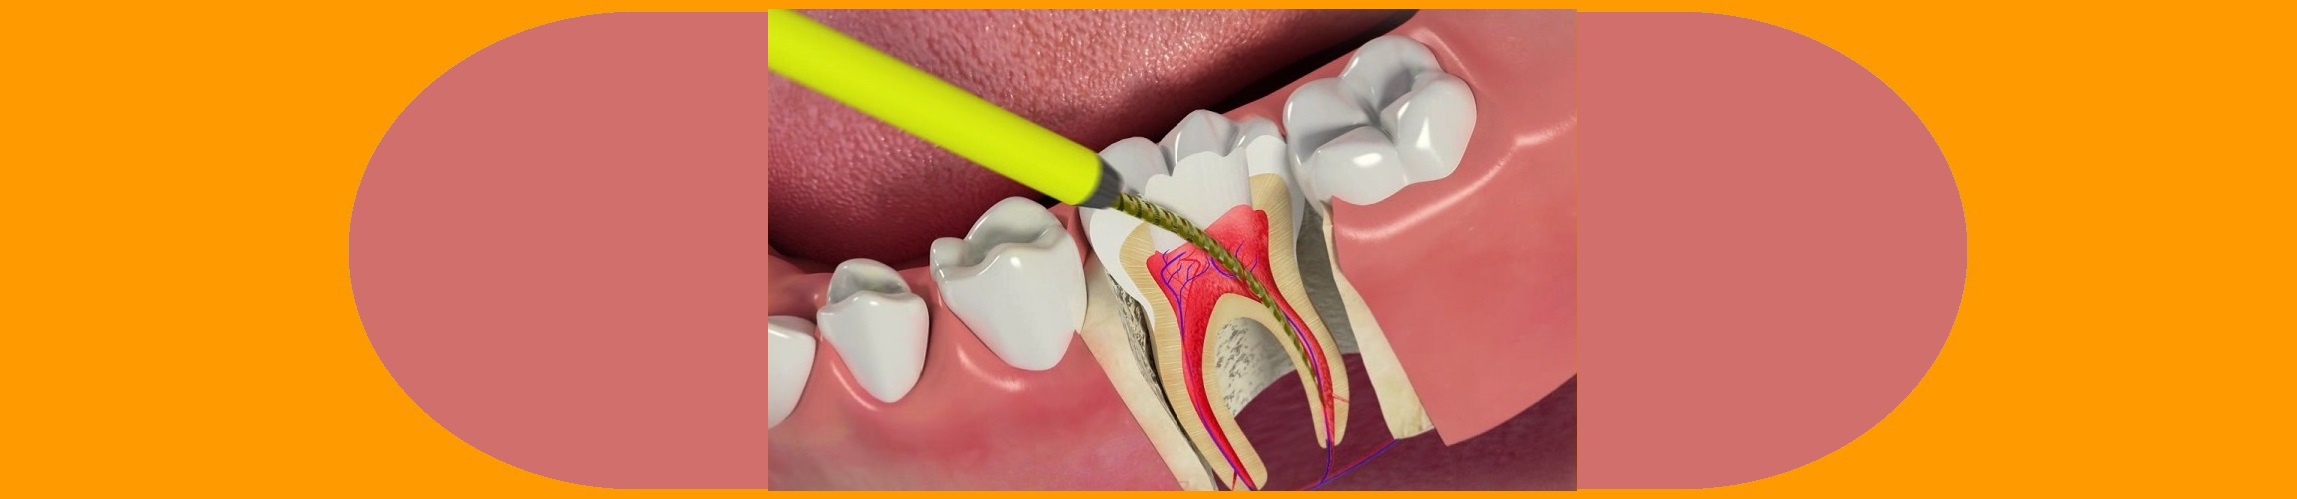 Root Canal Treatment | Root Canal Dentist Near Me | MM ...